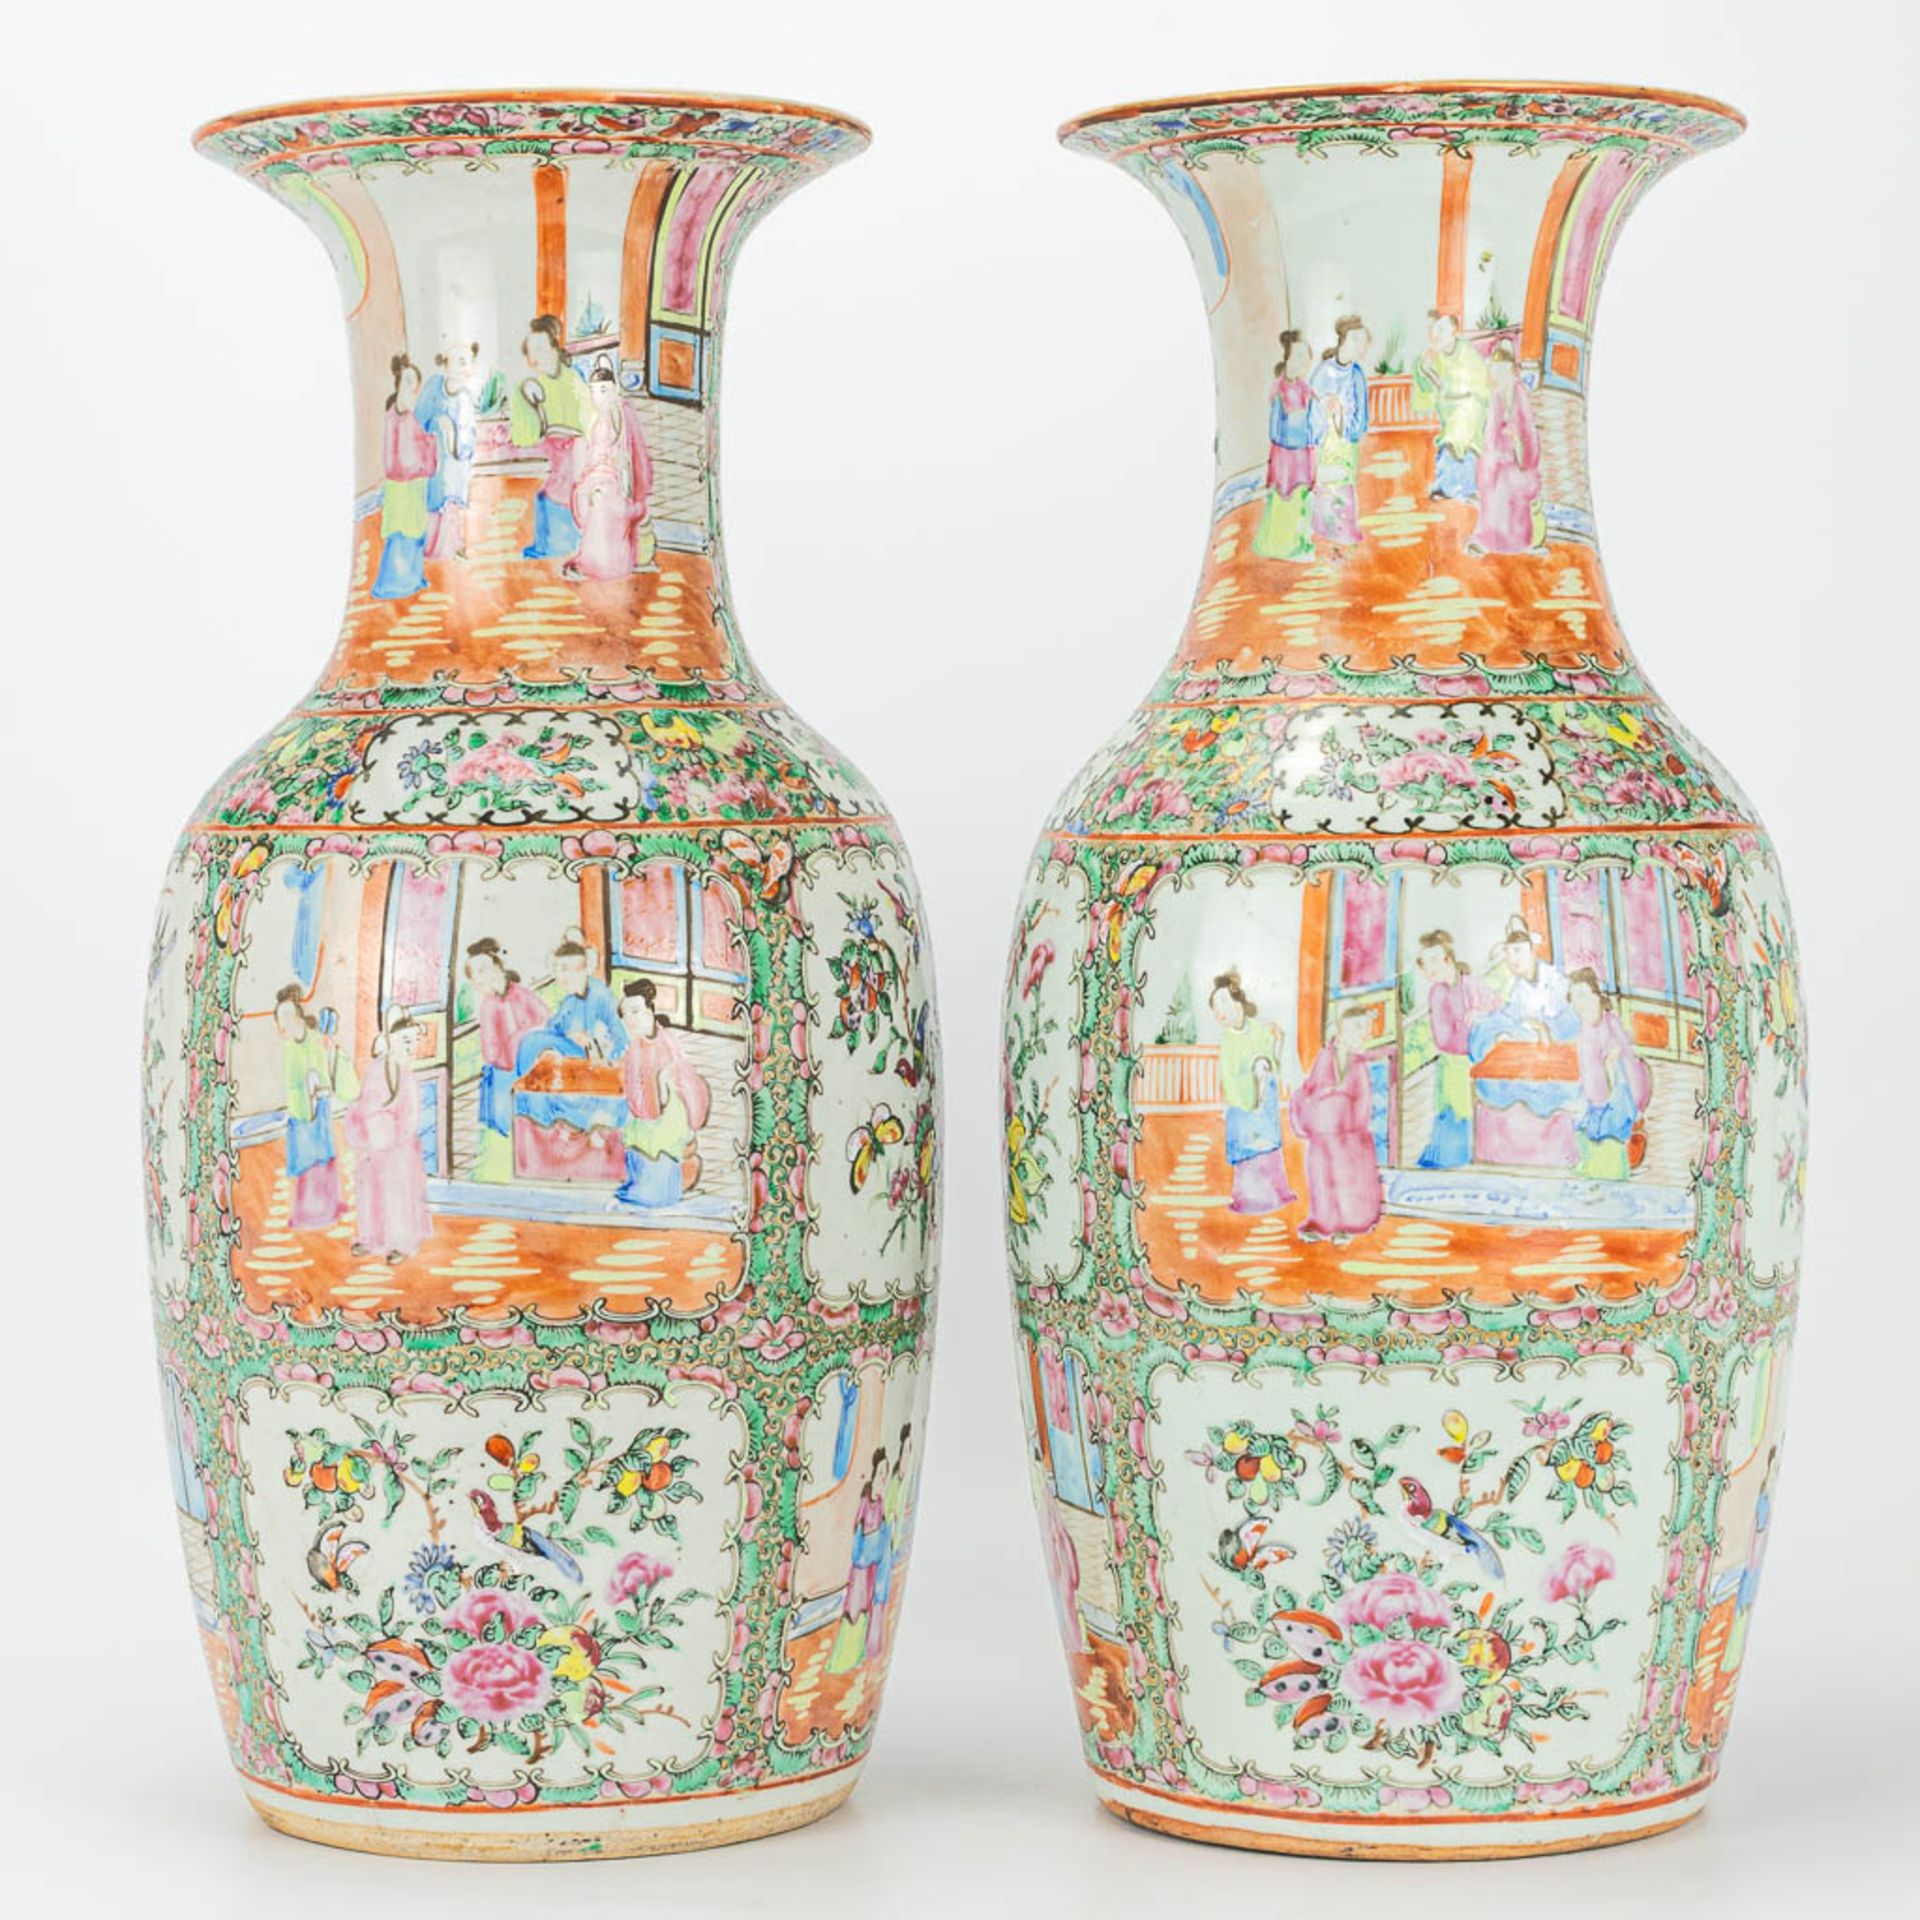 A pair of vases made of Chinese porcelain in Canton style. 19th century. - Image 12 of 17